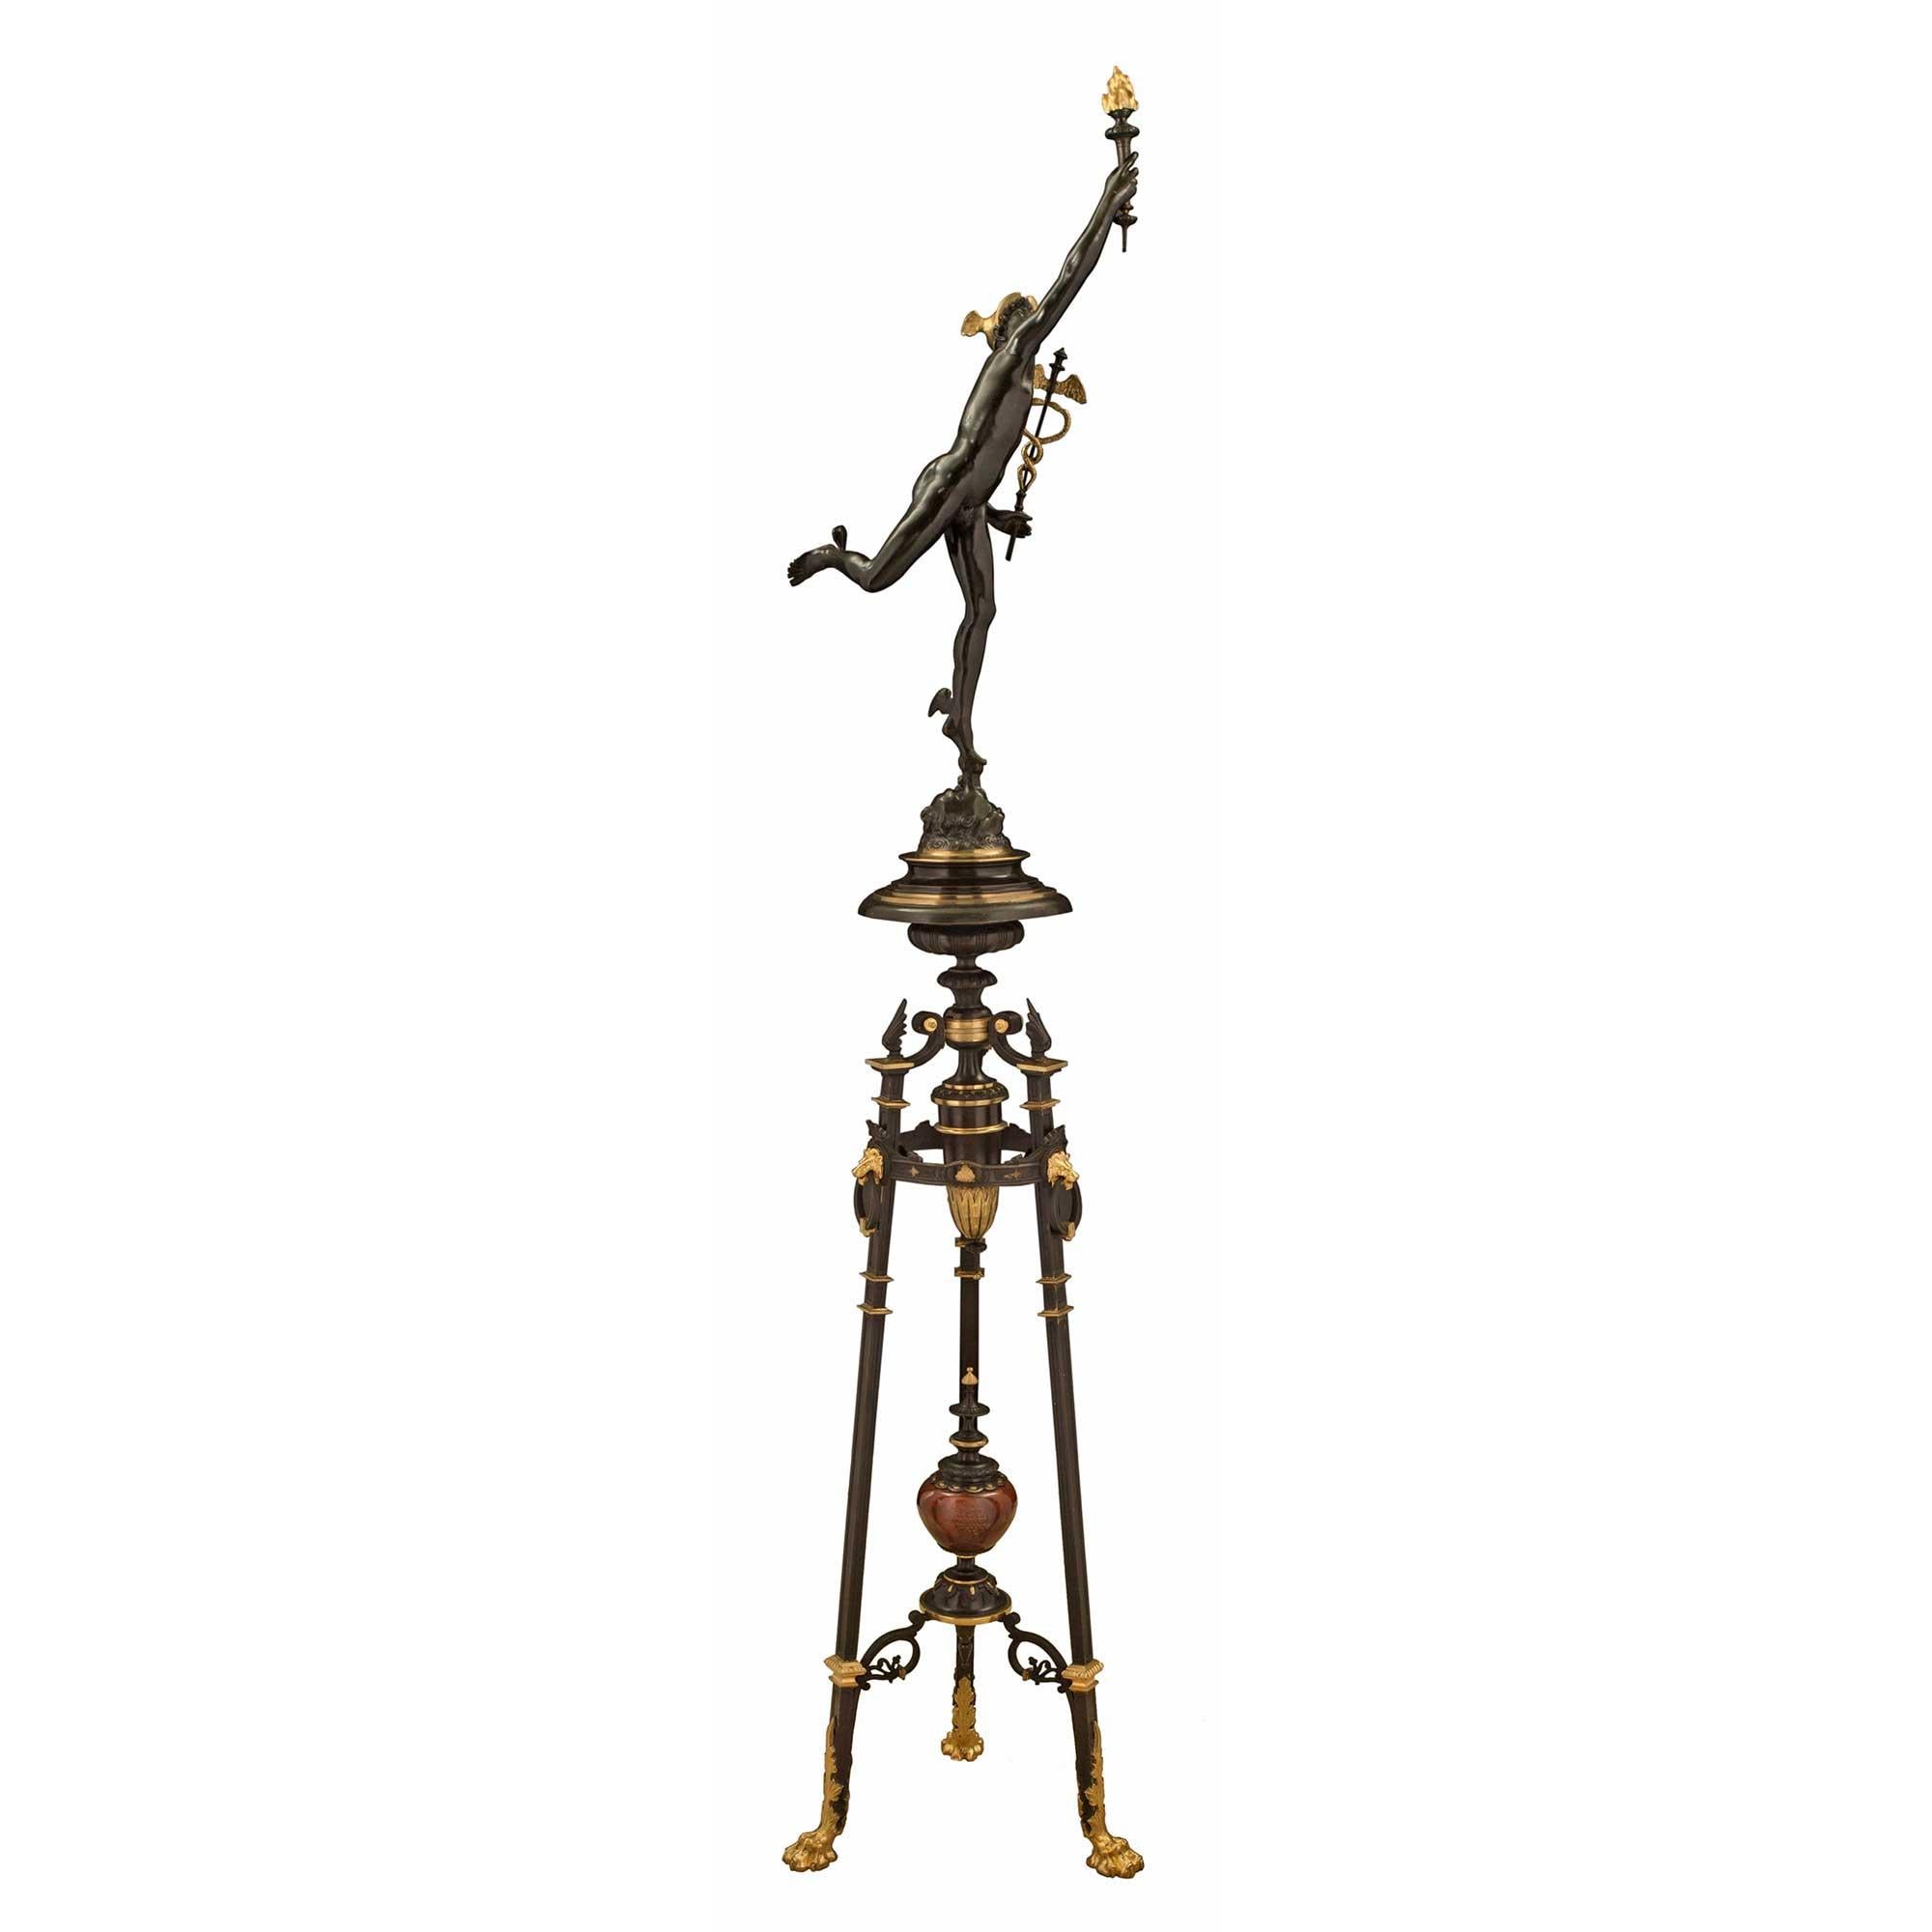 A striking French 19th century Neo-Classical st. patinated bronze and ormolu statue of Mercury, possibly by F. Barbedienne. The statue is raised on its original tripod base with handsome ormolu paw feet and large acanthus leaves. The three square